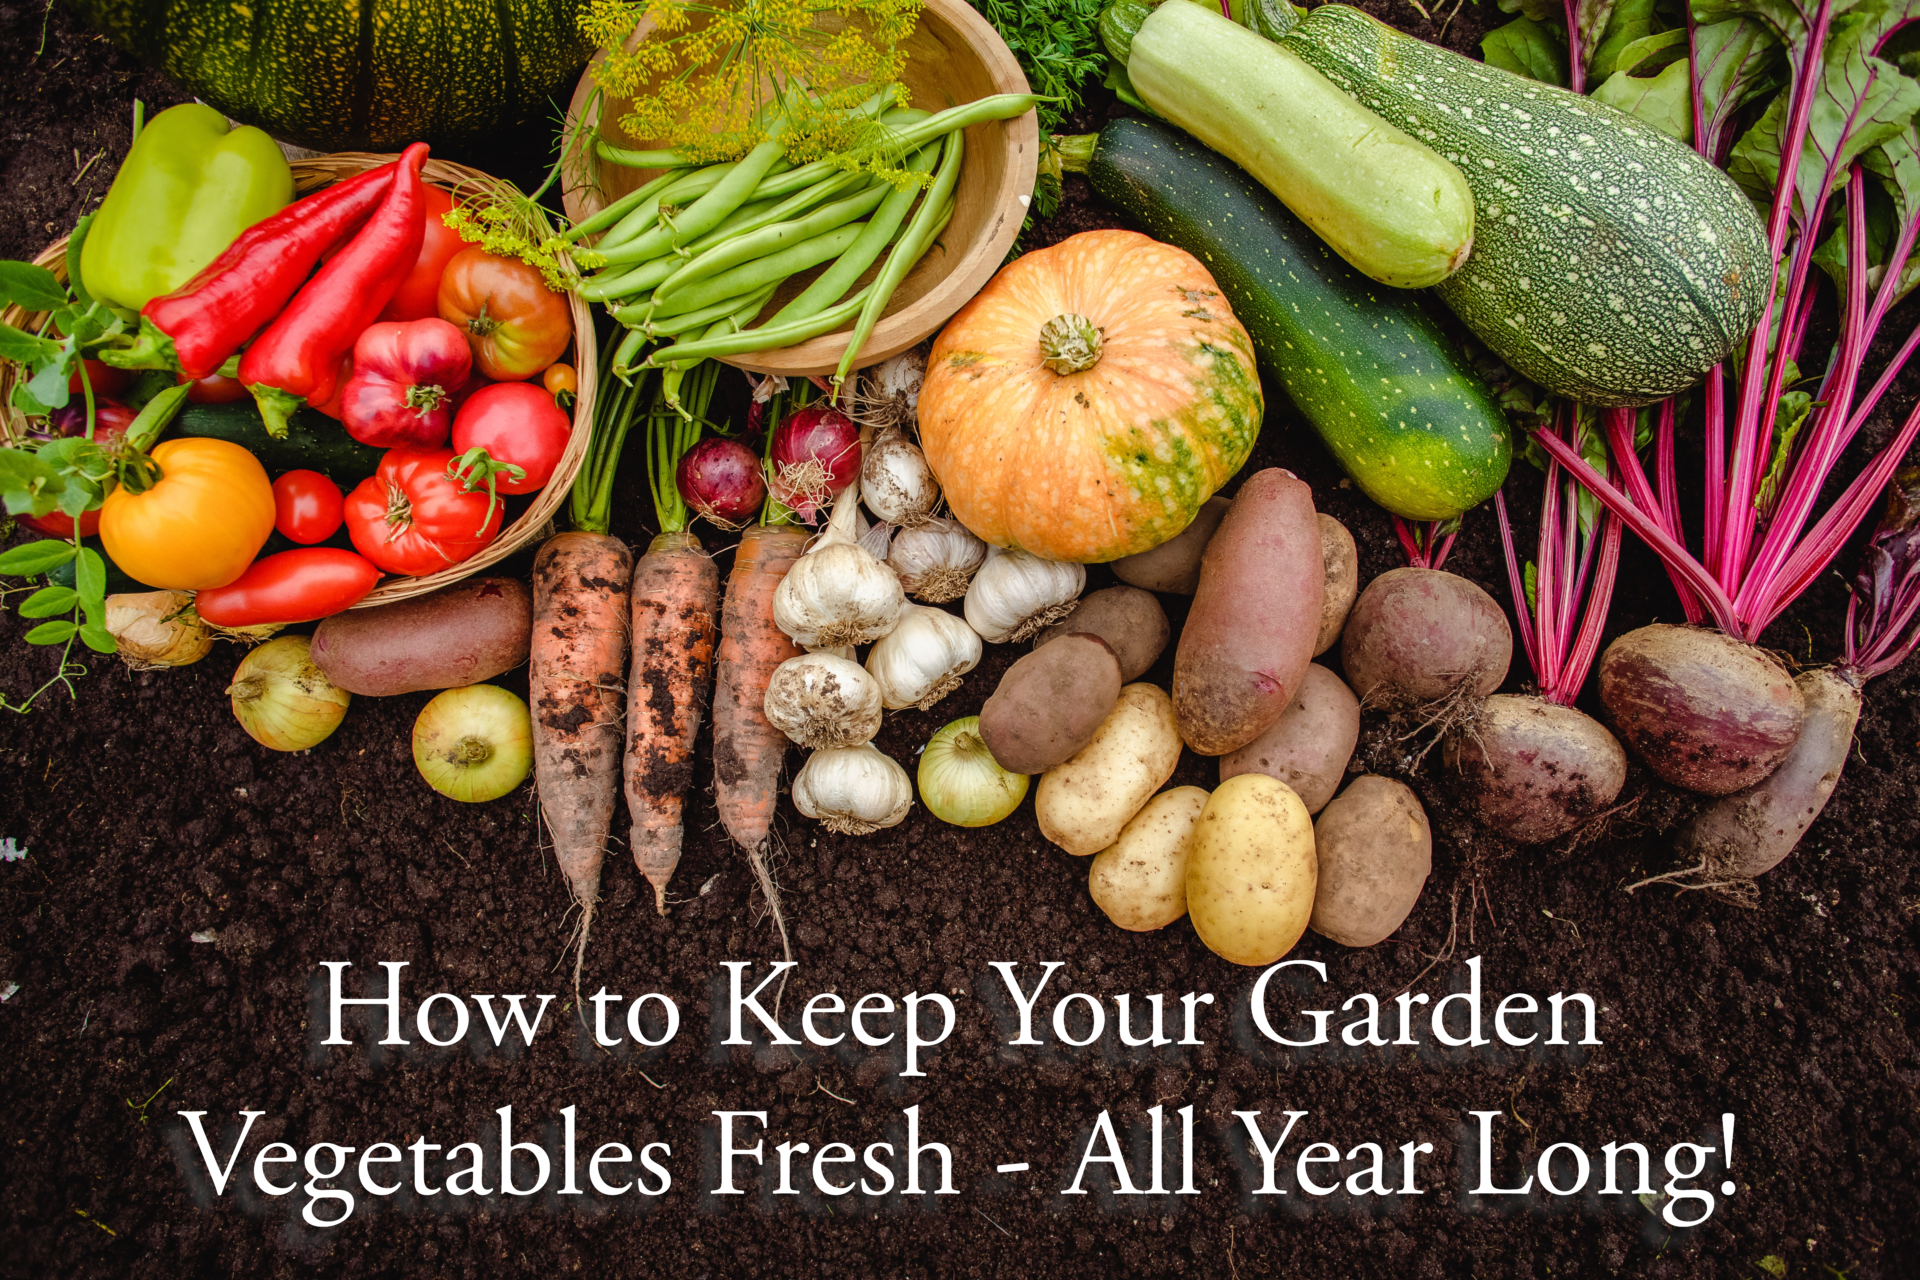 Keep Your Garden Vegetables Fresh All Year Long